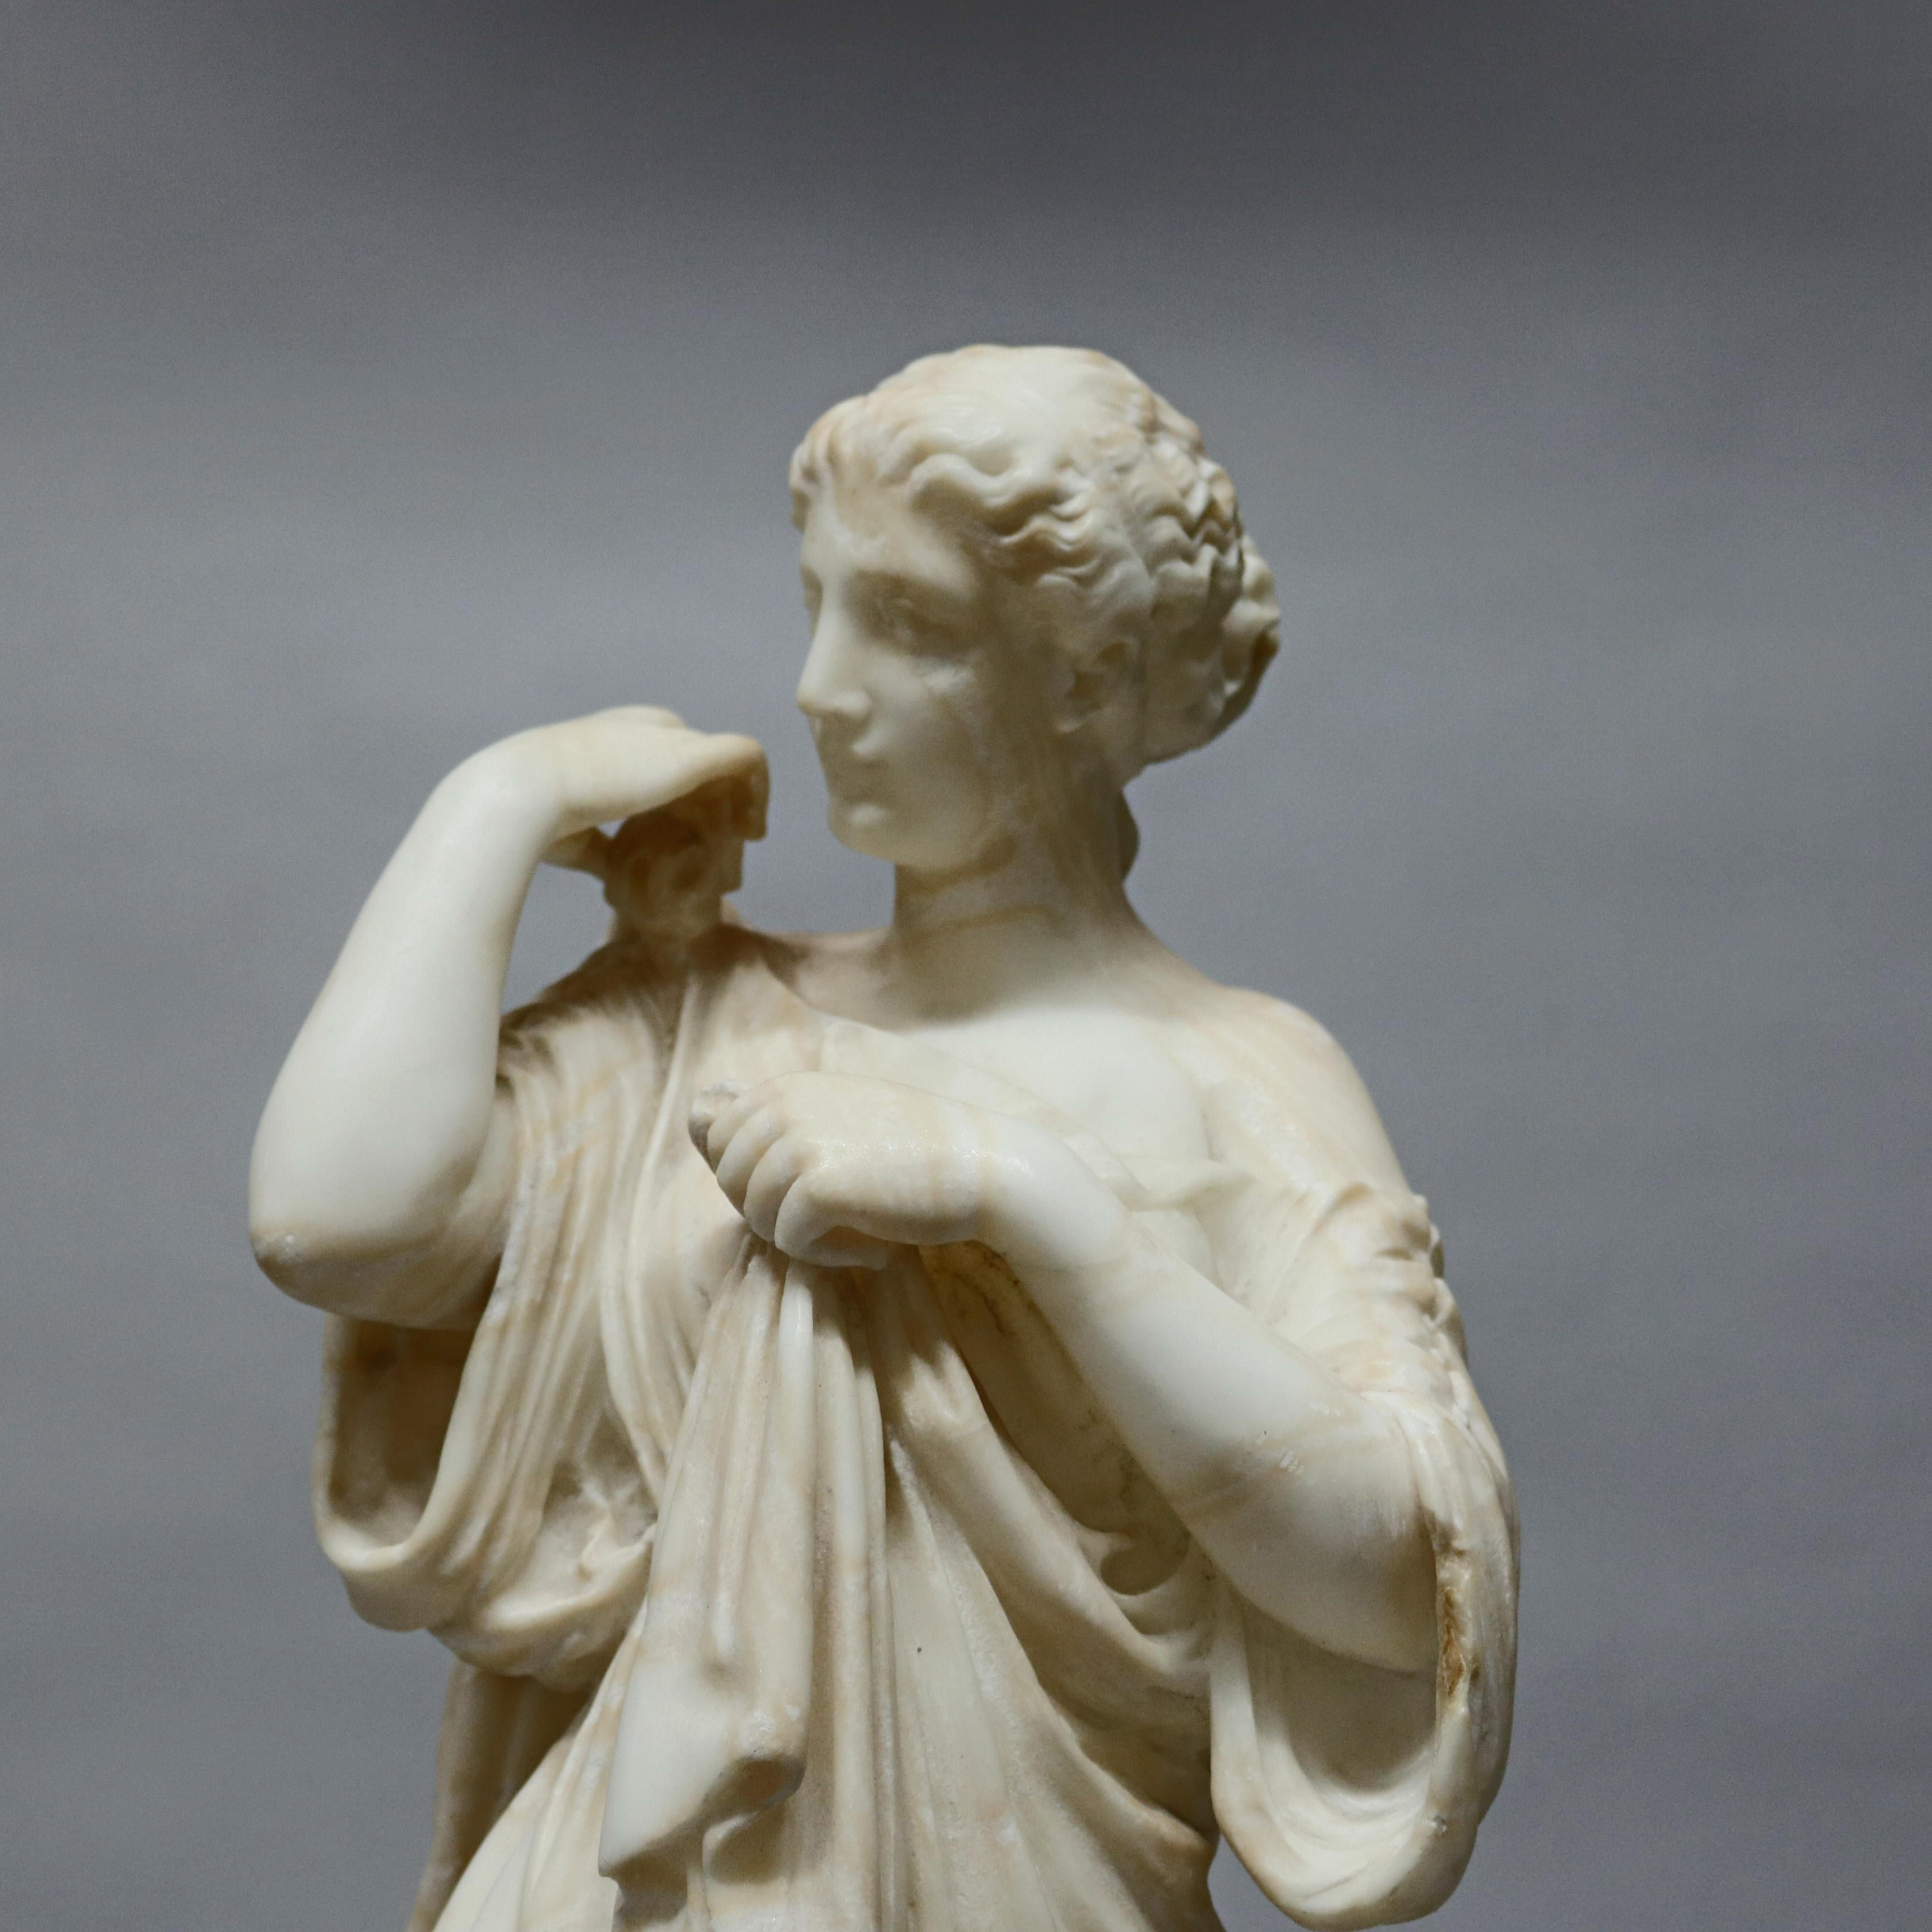 An antique Victorian carved marble sculpture depicts full length portrait of young Grecian woman in countryside setting, circa 1890.

Measures: 23.5